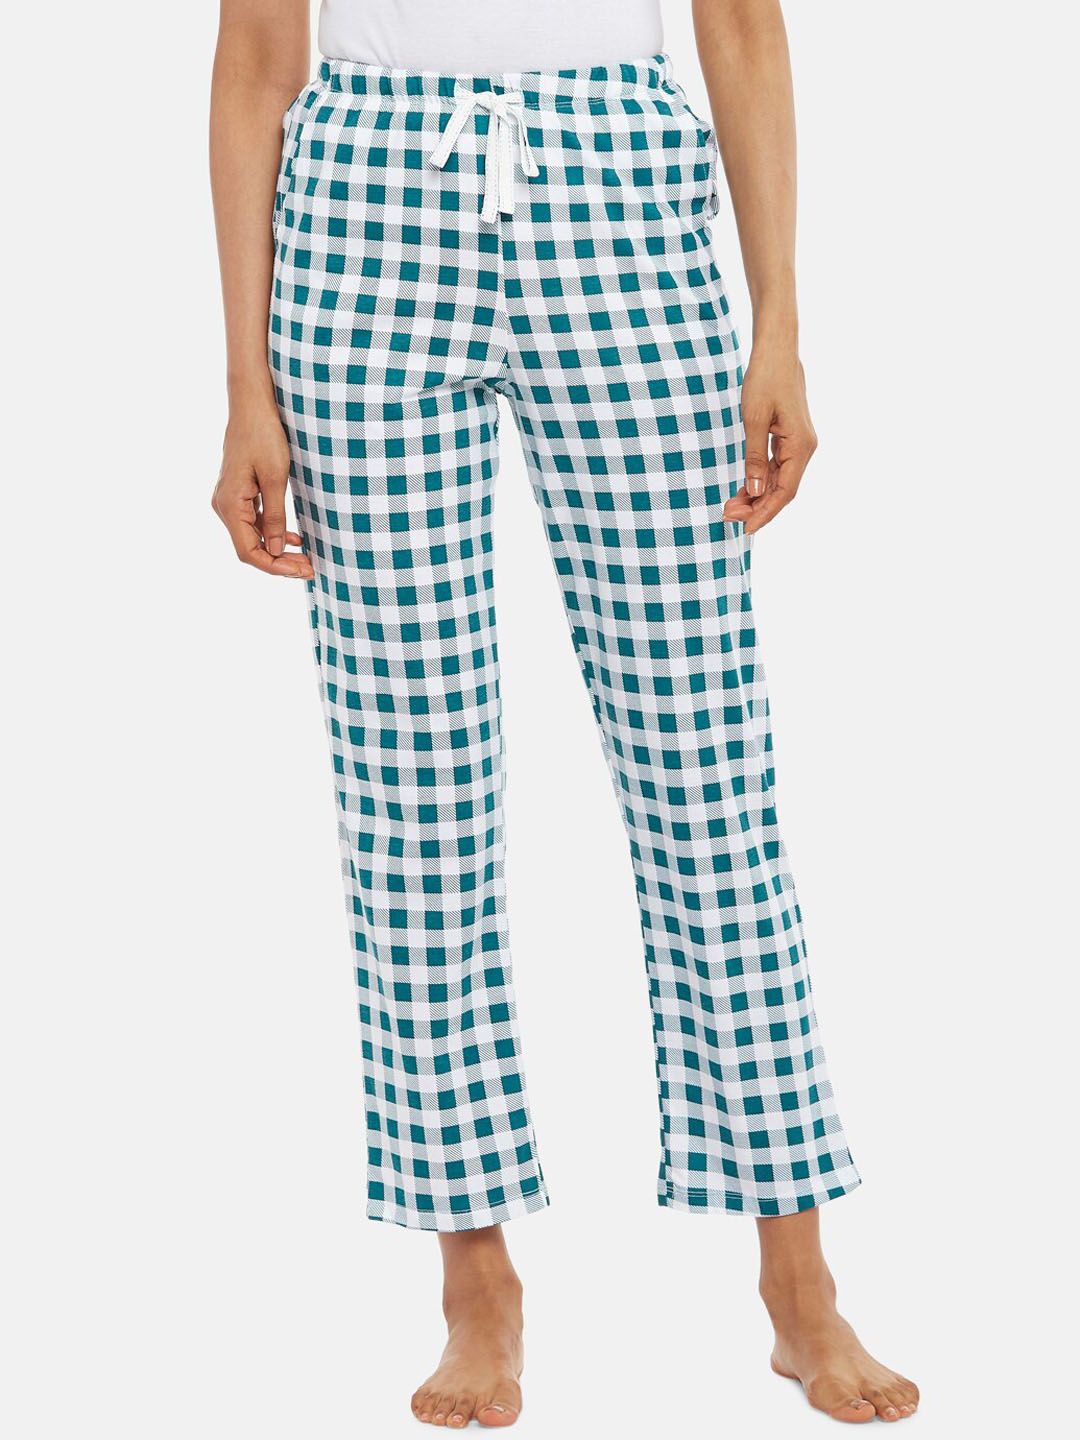 Dreamz by Pantaloons Women Blue Checked Cotton Lounge Pants Price in India